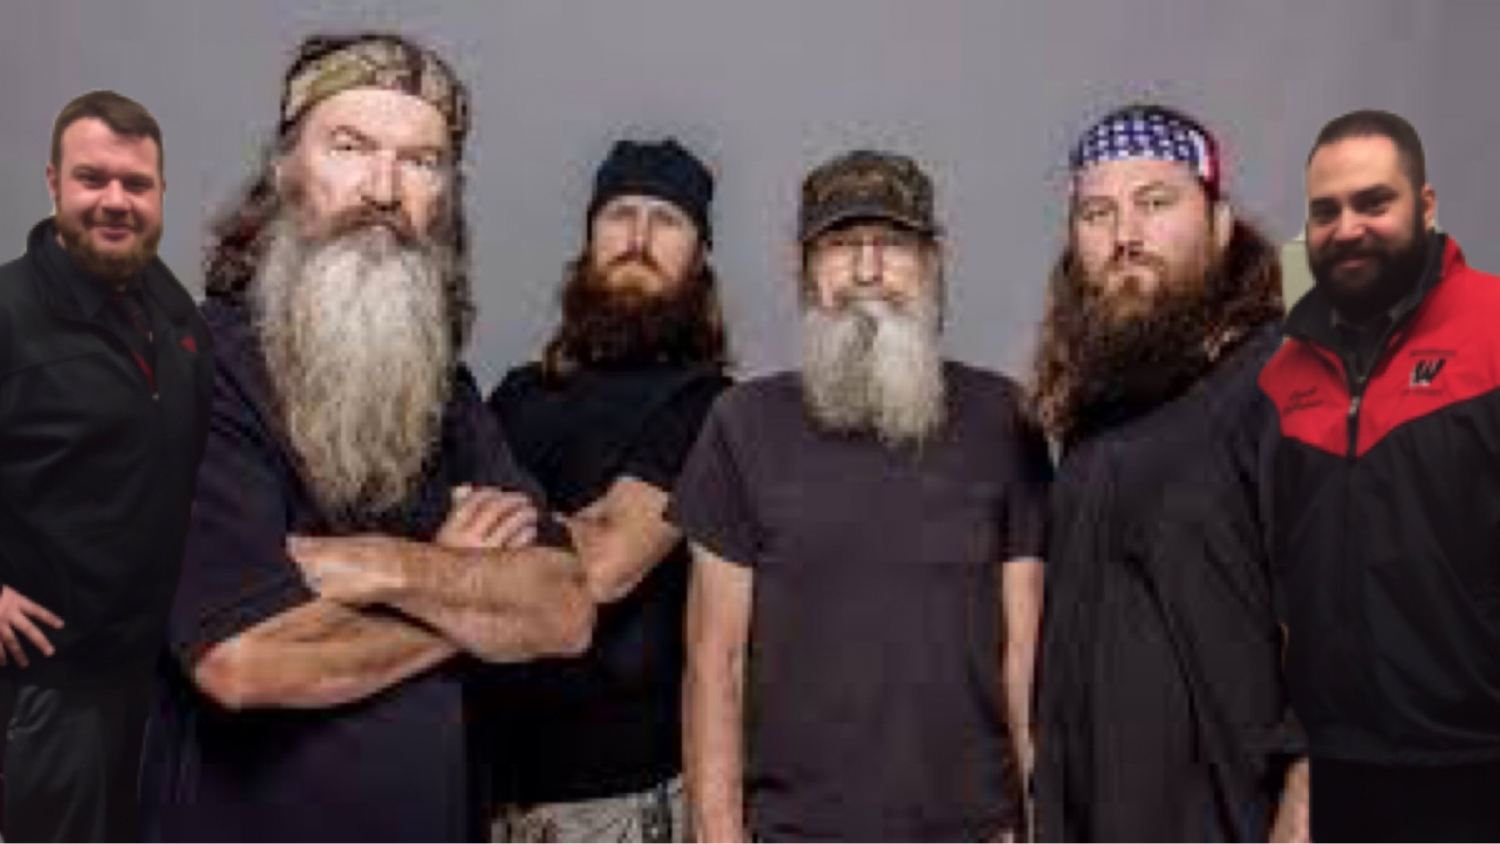 Rotella and Di Palma meet up with Duck Dynasty for the first time